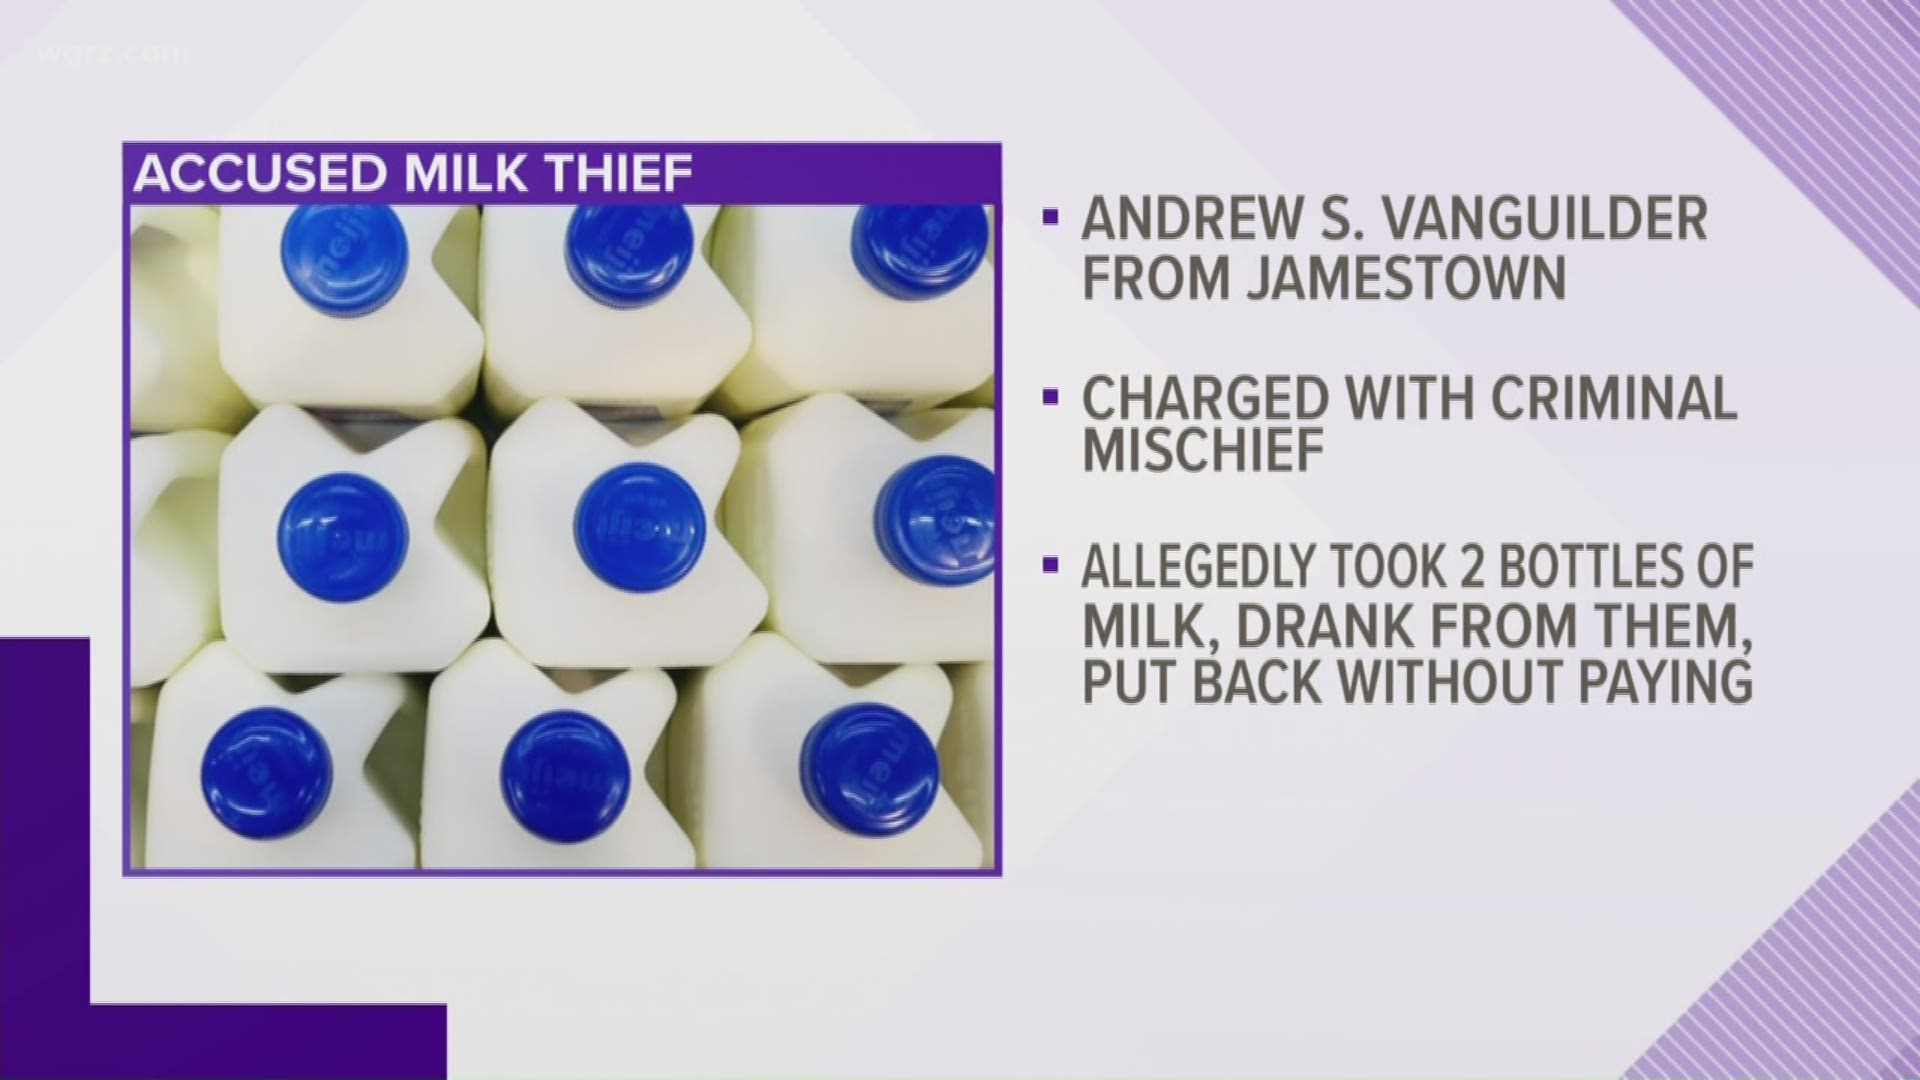 Man Allegedly Drank Milk In Store And Did Not Pay